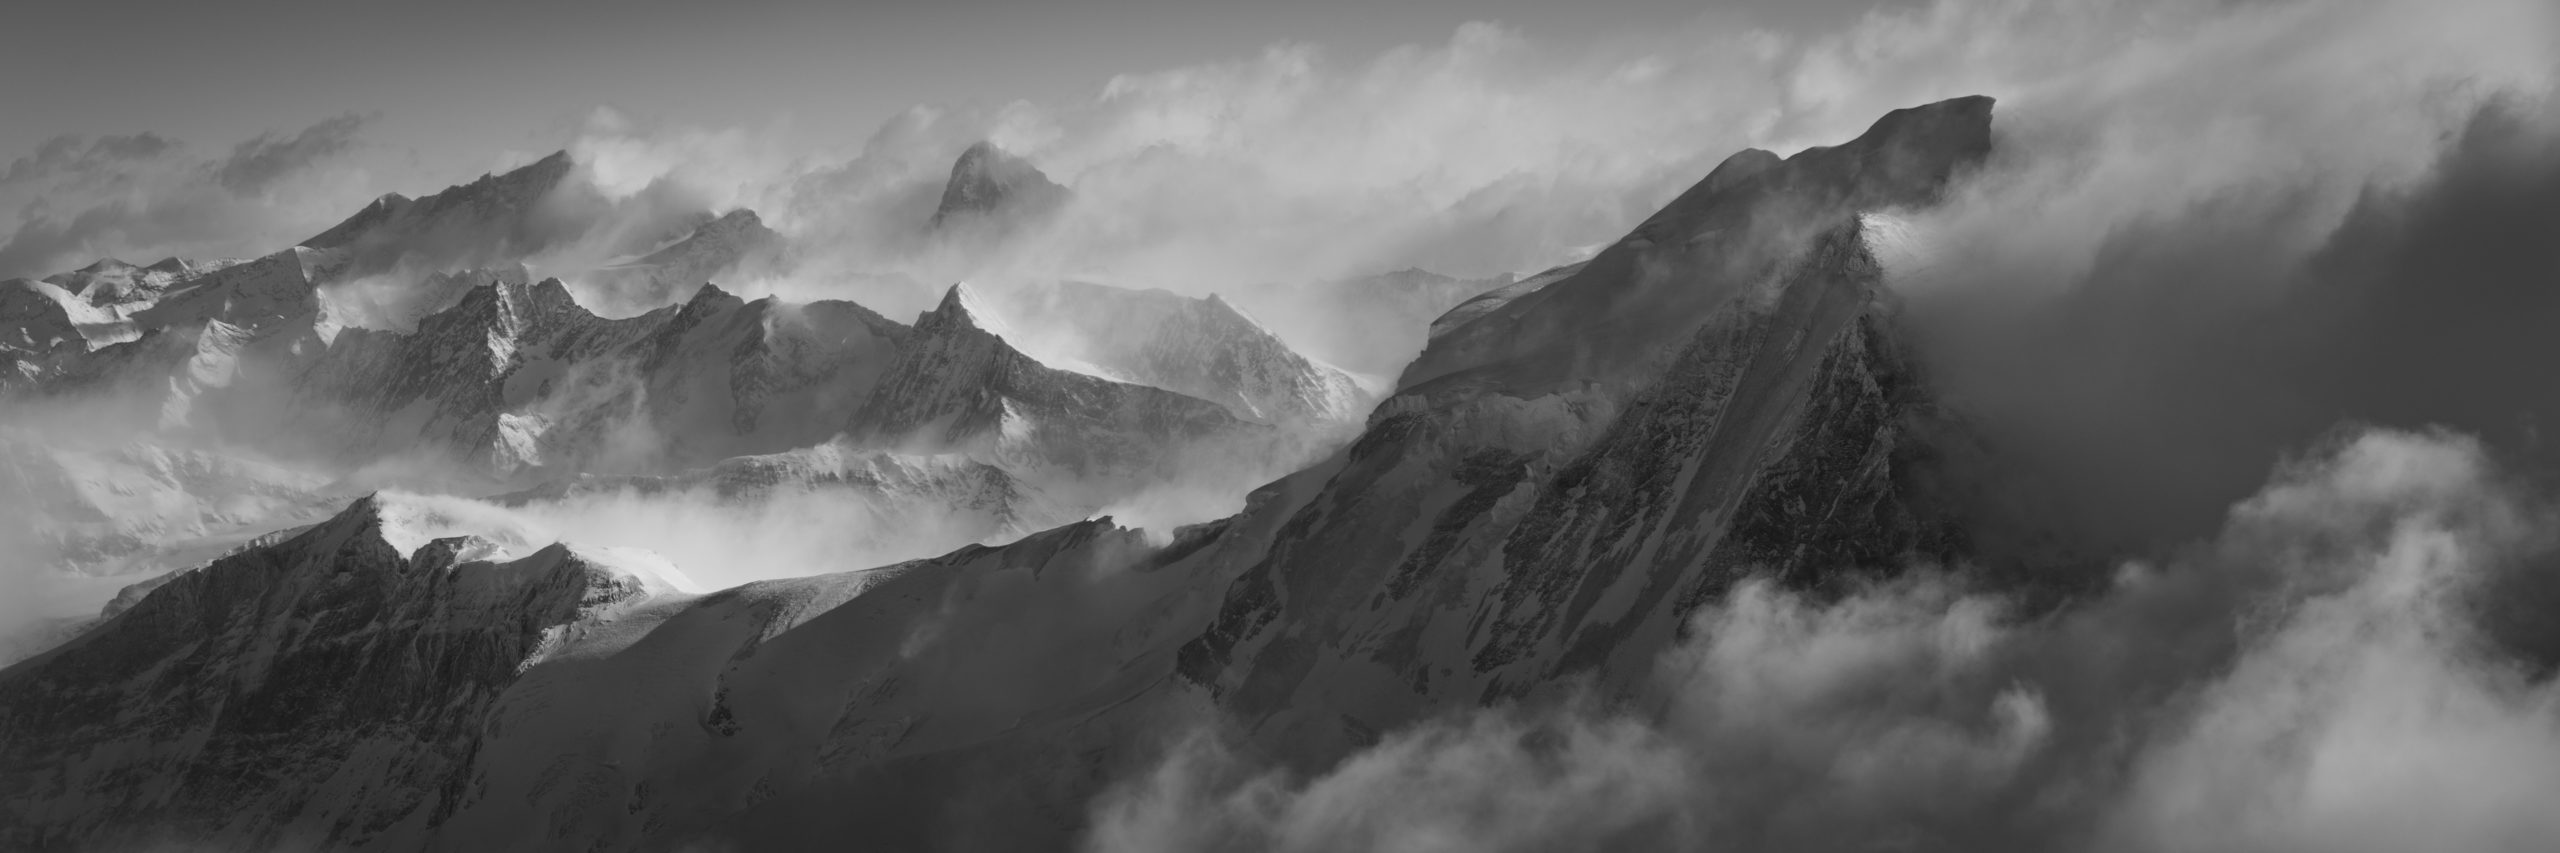 Panorama mountain Grand Combin - black and white photo painting mountain of the Valais Alps